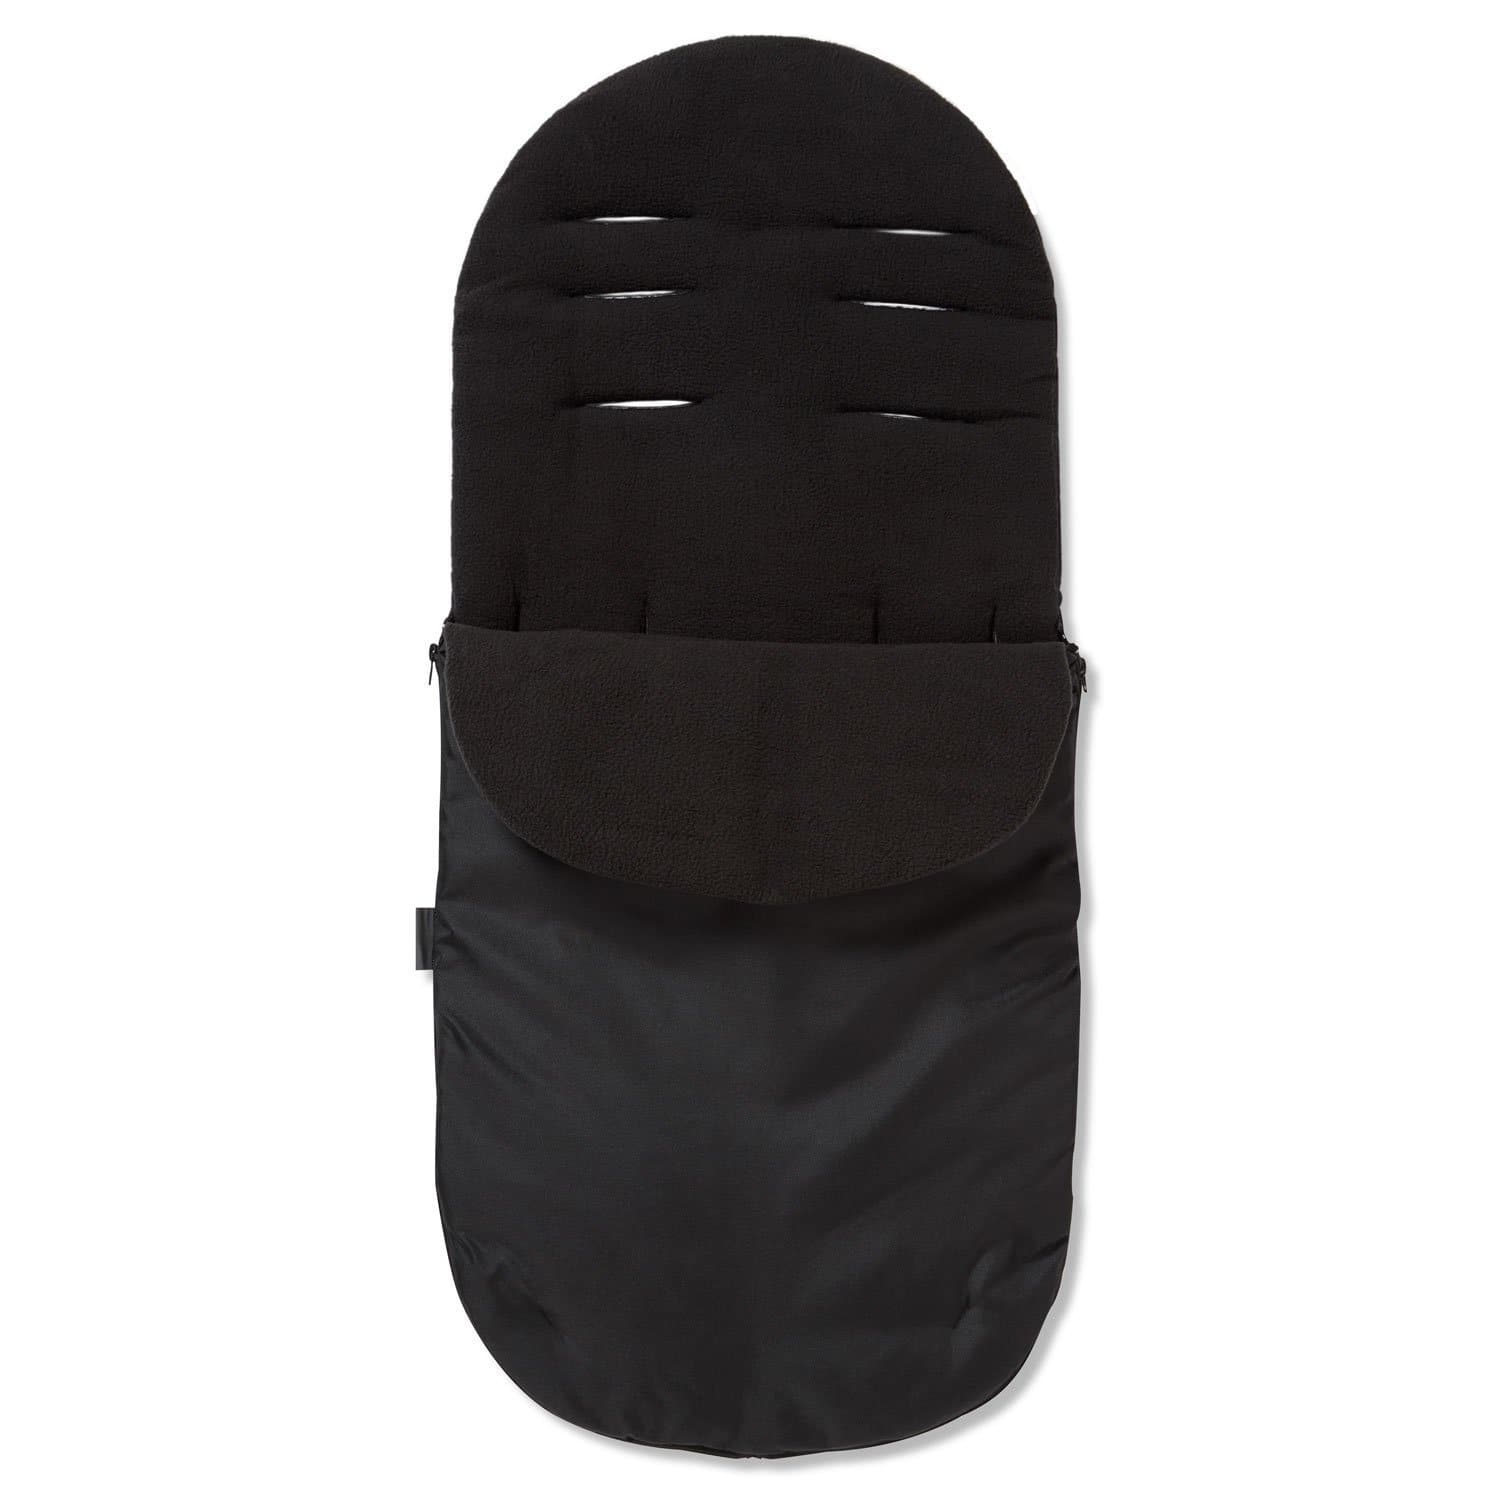 Footmuff / Cosy Toes Compatible with Formula - Black / Fits All Models | For Your Little One